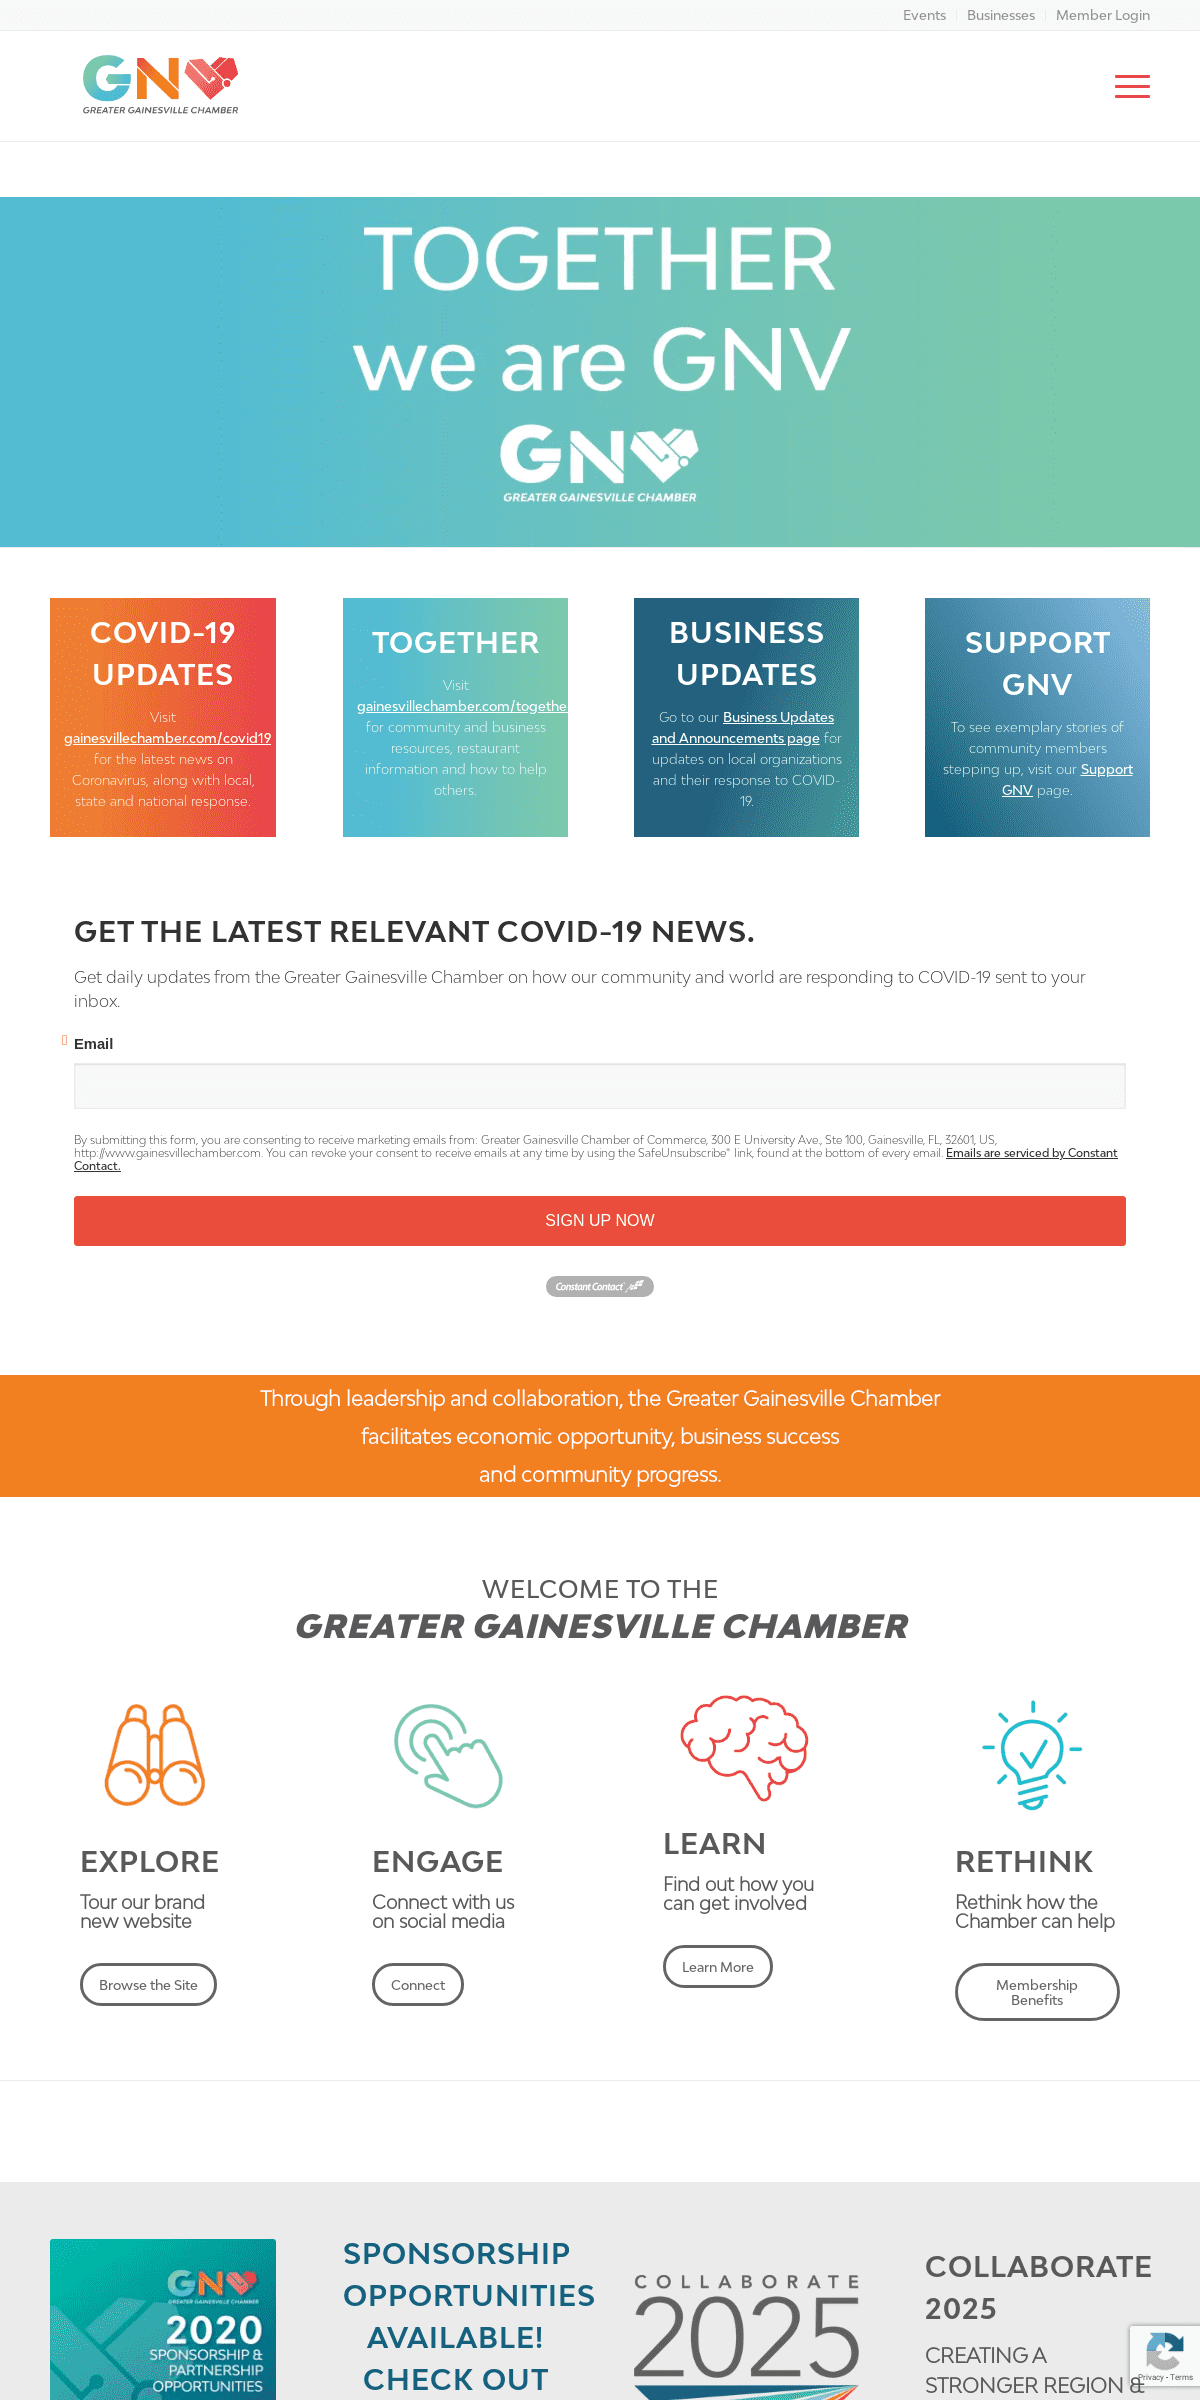 A complete backup of gainesvillechamber.com